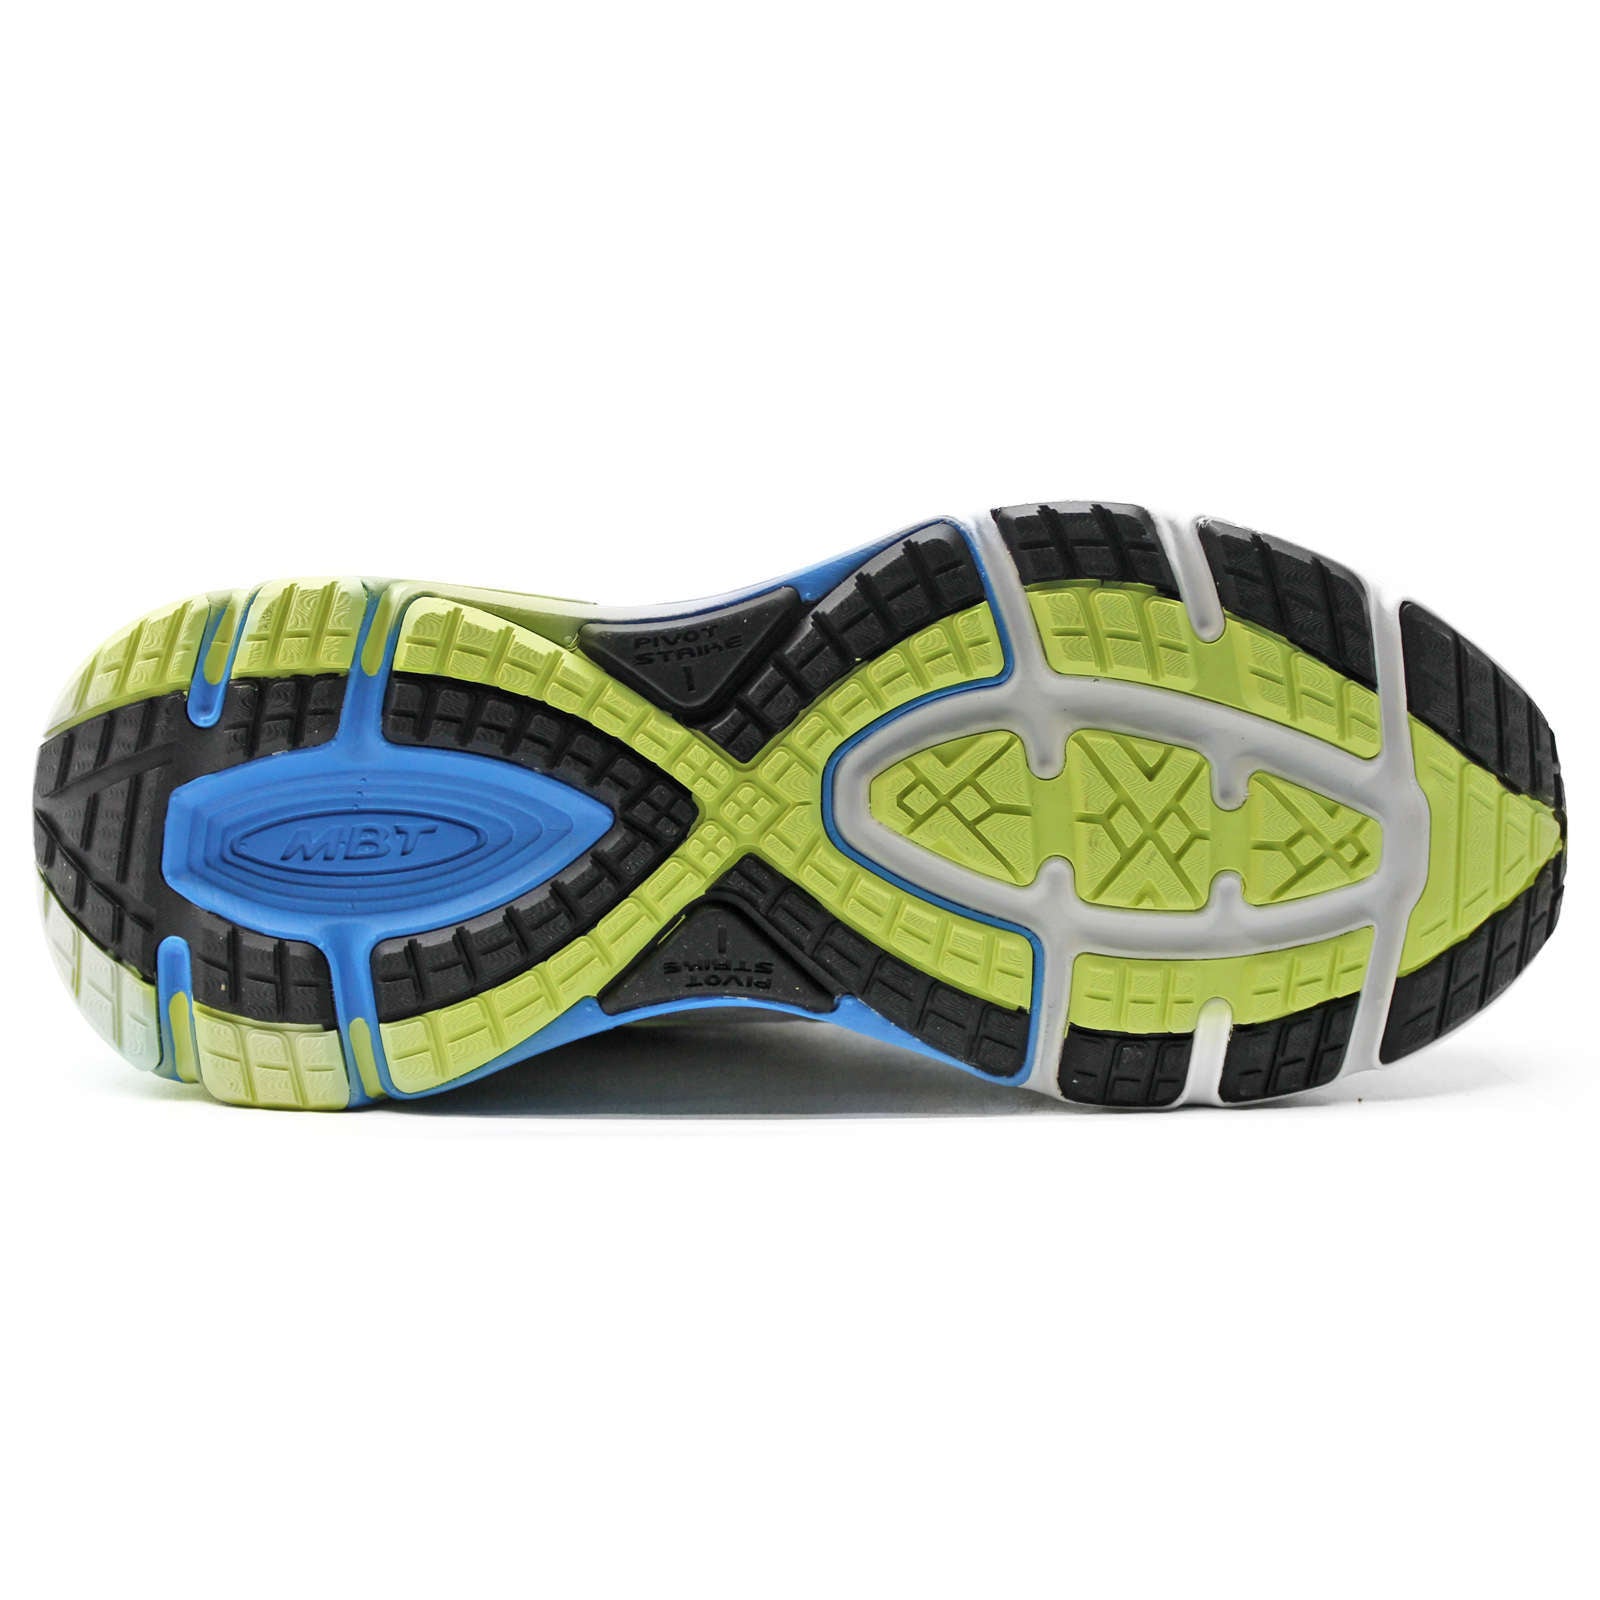 MBT GTC-2000 Mesh Women's Low-Top Trainers#color_grey lime yellow